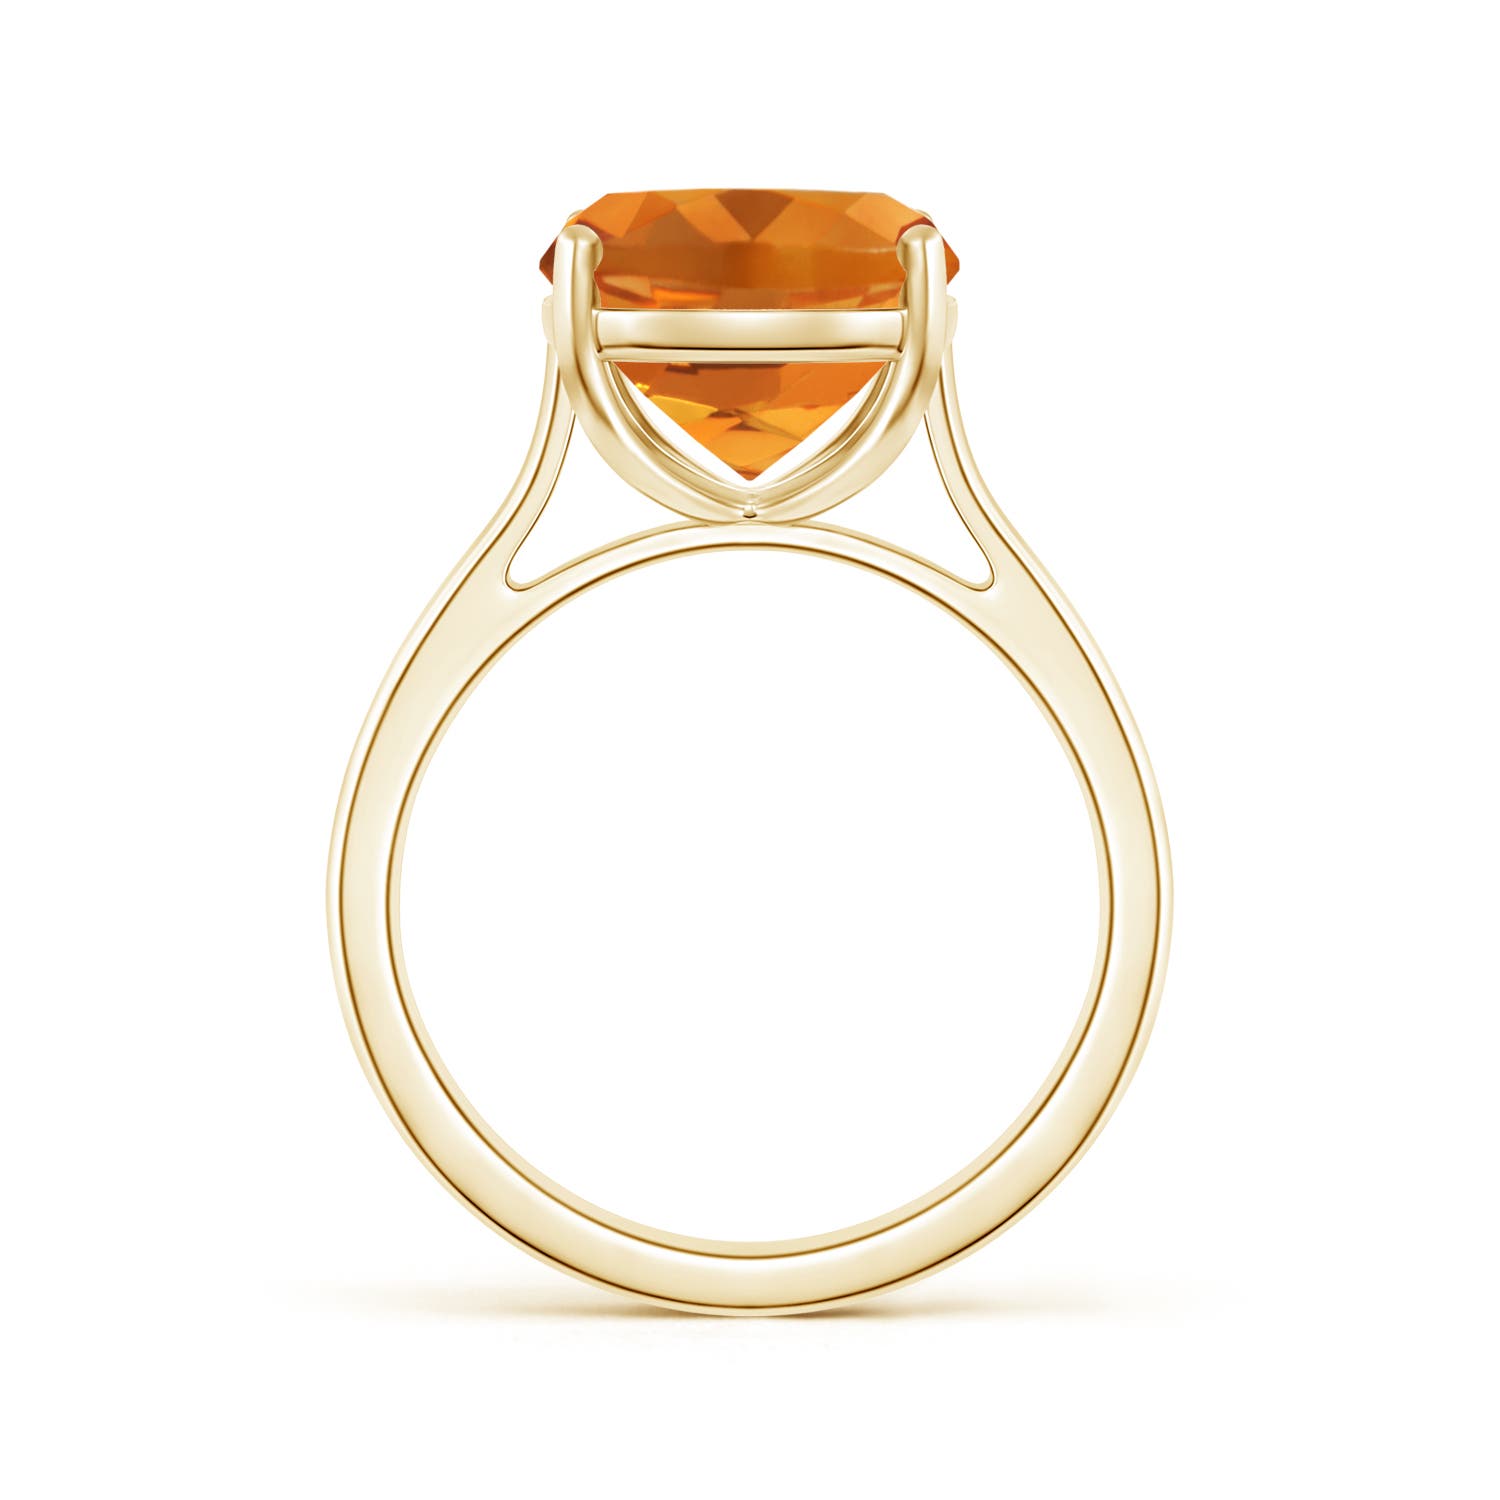 AAA - Citrine / 4.74 CT / 14 KT Yellow Gold